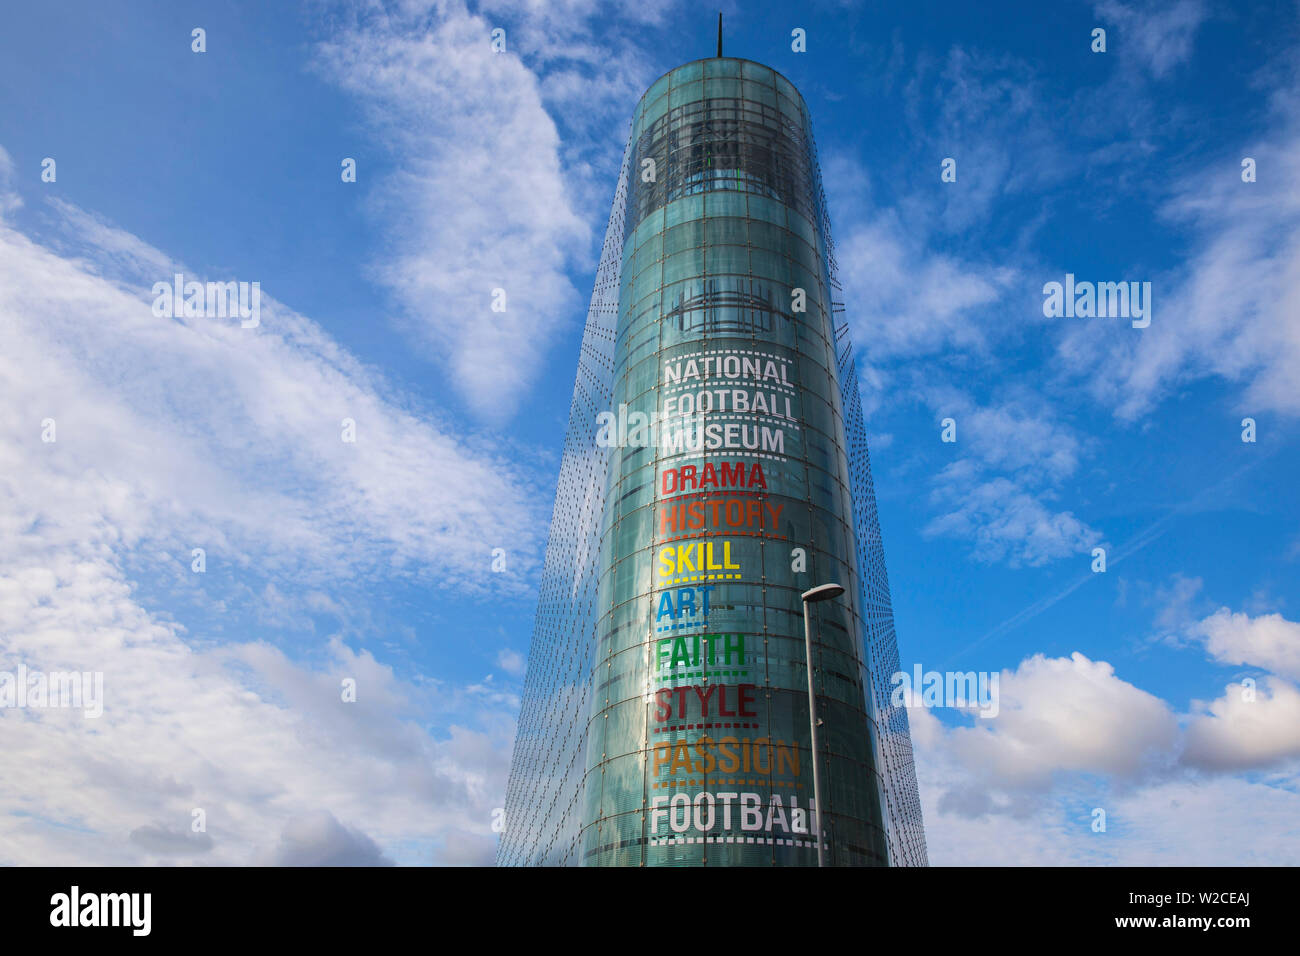 United Kingdom, England, Greater Manchester, Manchester, Football museum Stock Photo